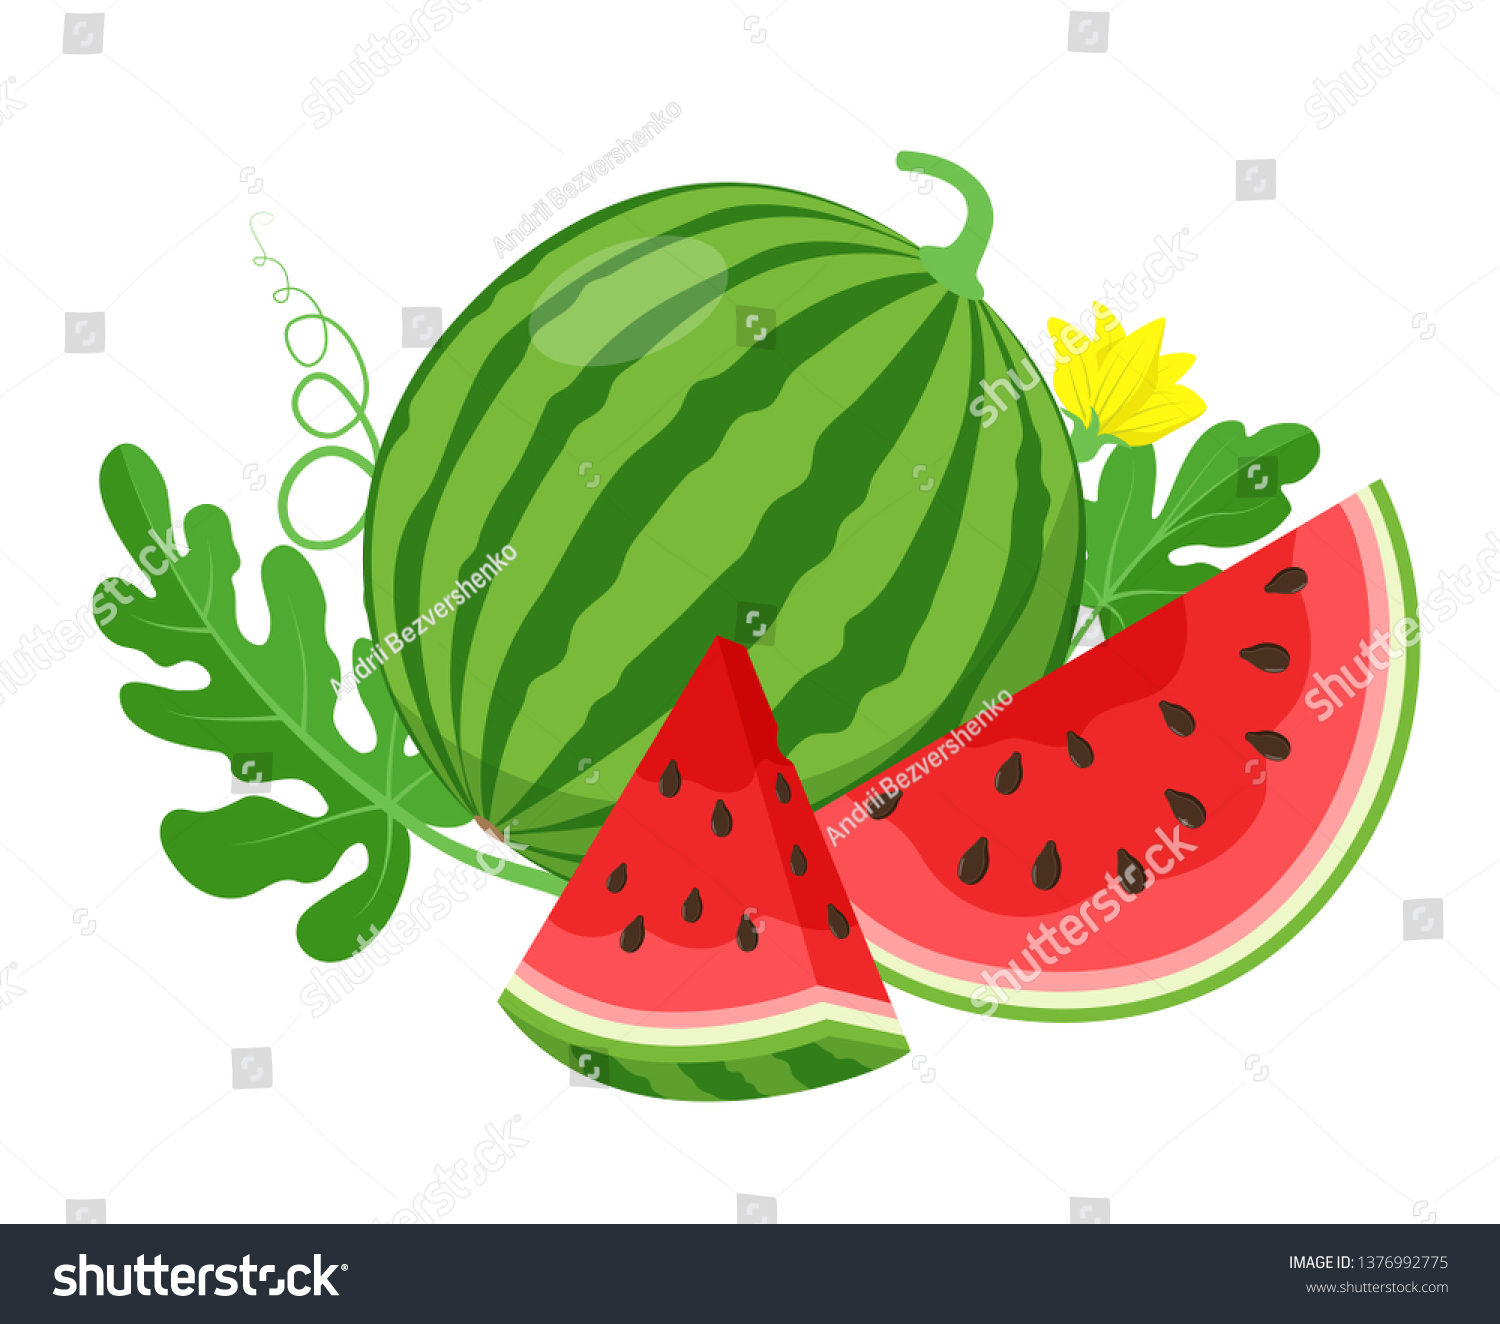 Watermelon and juicy slices, green leaves and yellow watermelon flower vector illustration in flat design. Summer food concept illustration isolated on white background. #1376992775